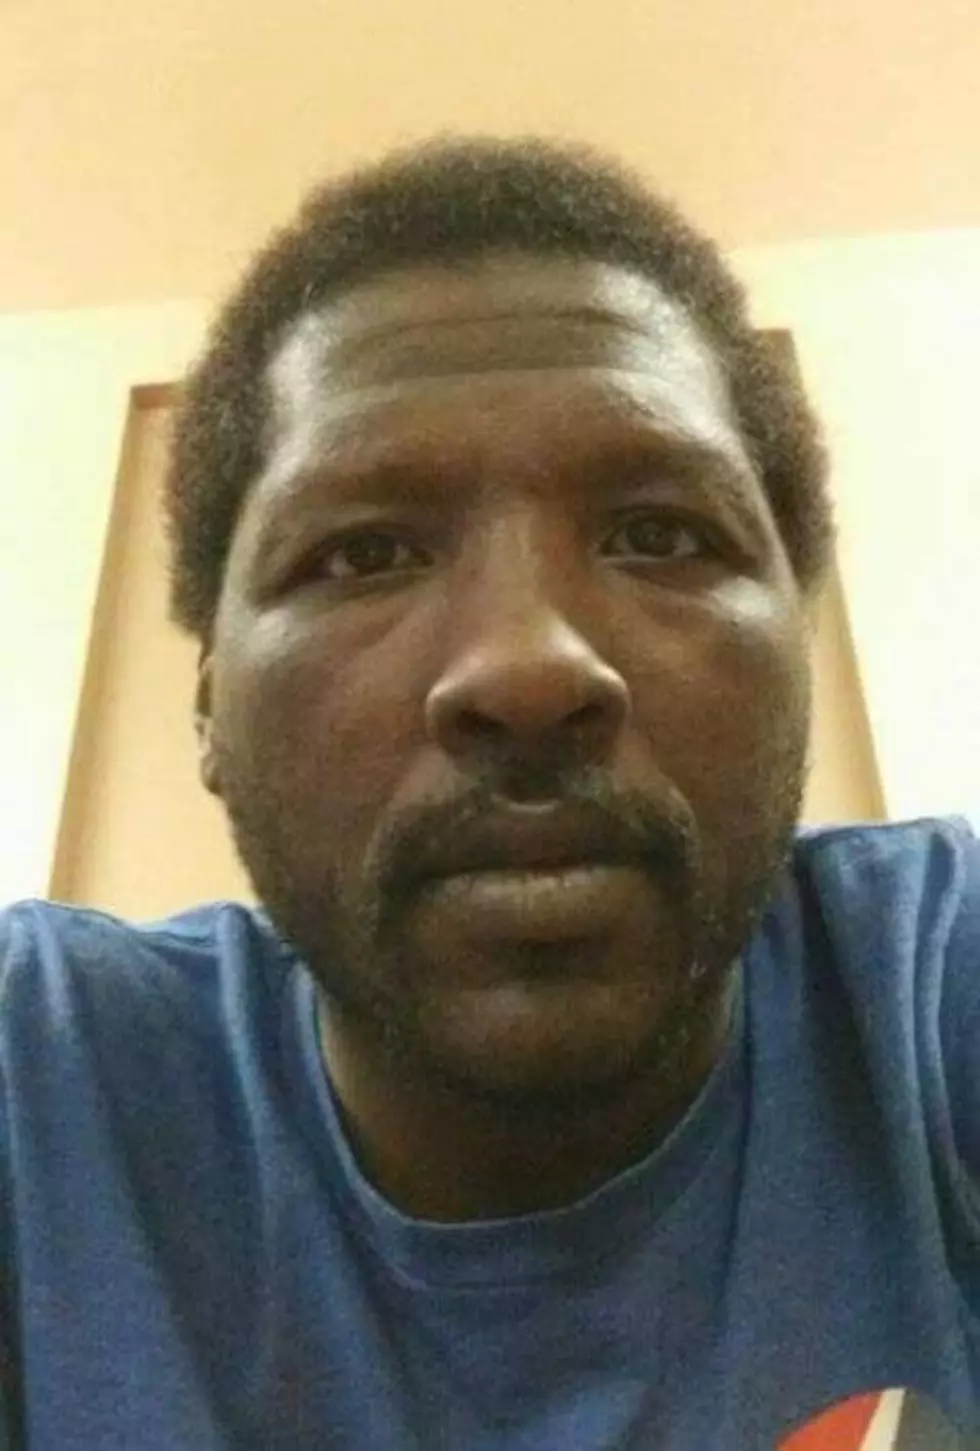 This Man Is Missing After Visiting Kalamazoo – Have You Seen Him?